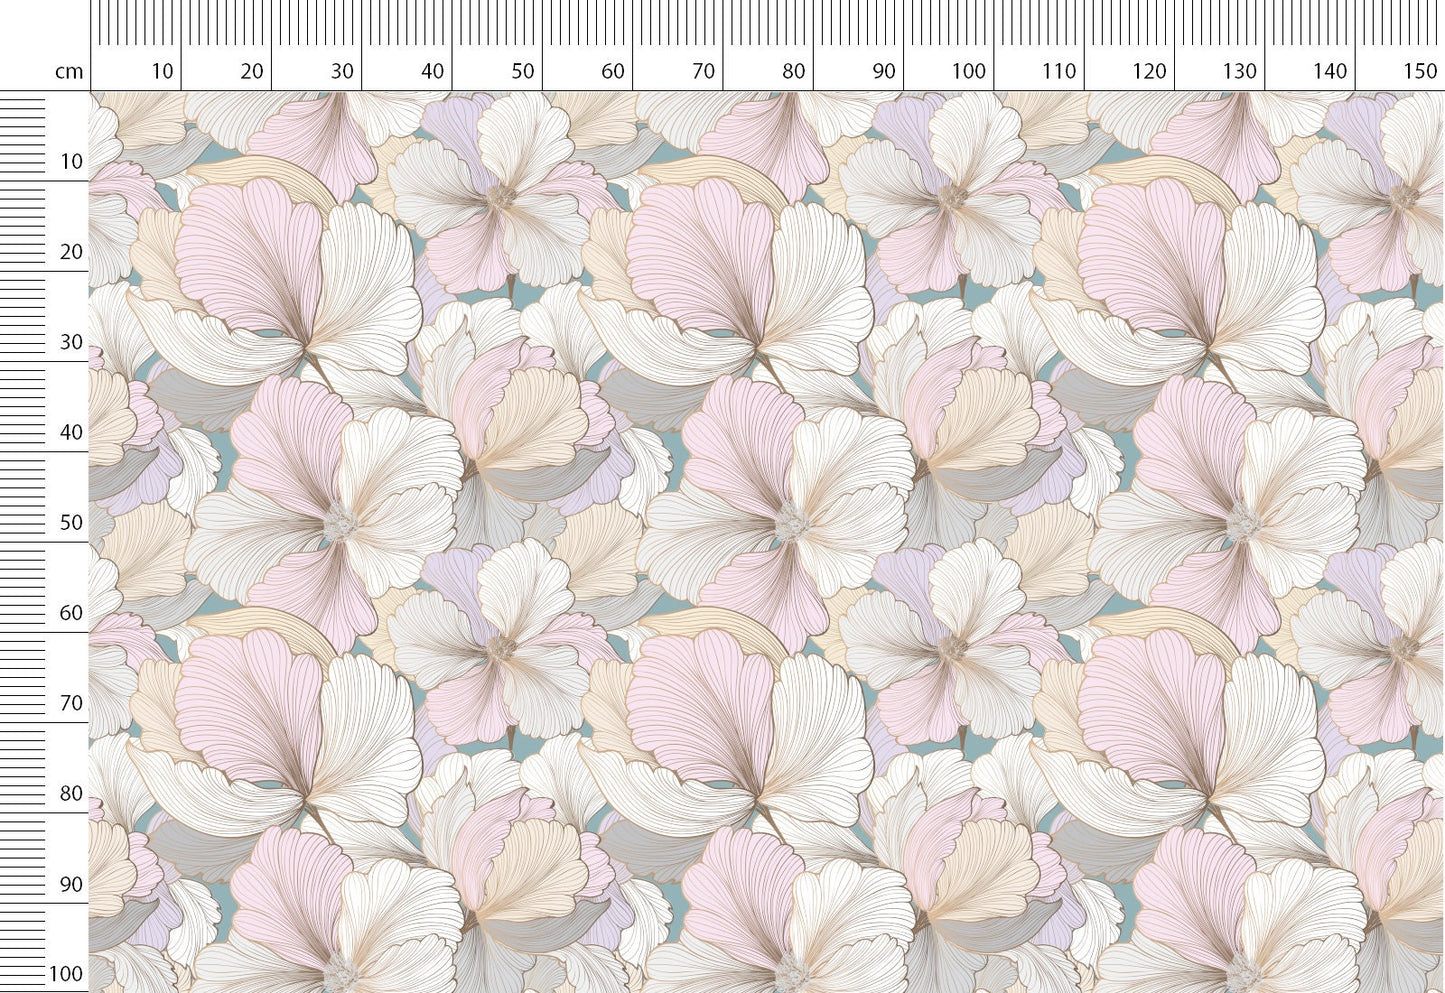 Floral Linen Fabric By The Yard Natural Stonewashed Linen Fabric For Clothing & Home Textile - Width 148 cm/1.62yd